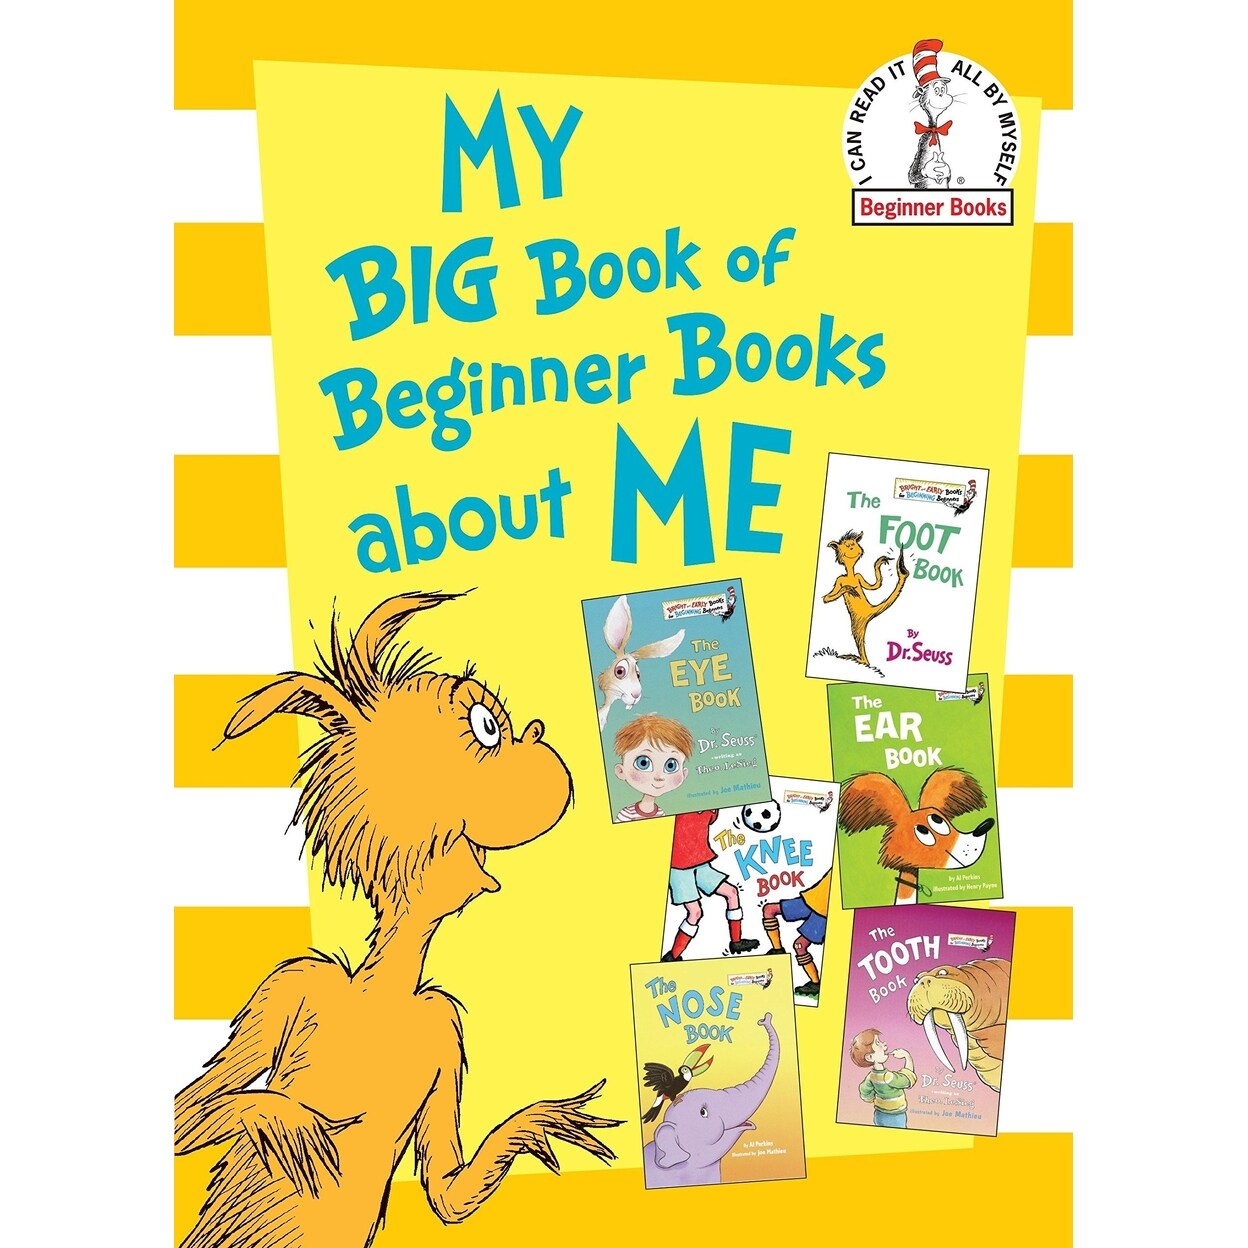 Dr. Seuss My Big Book of Beginner Books About Me